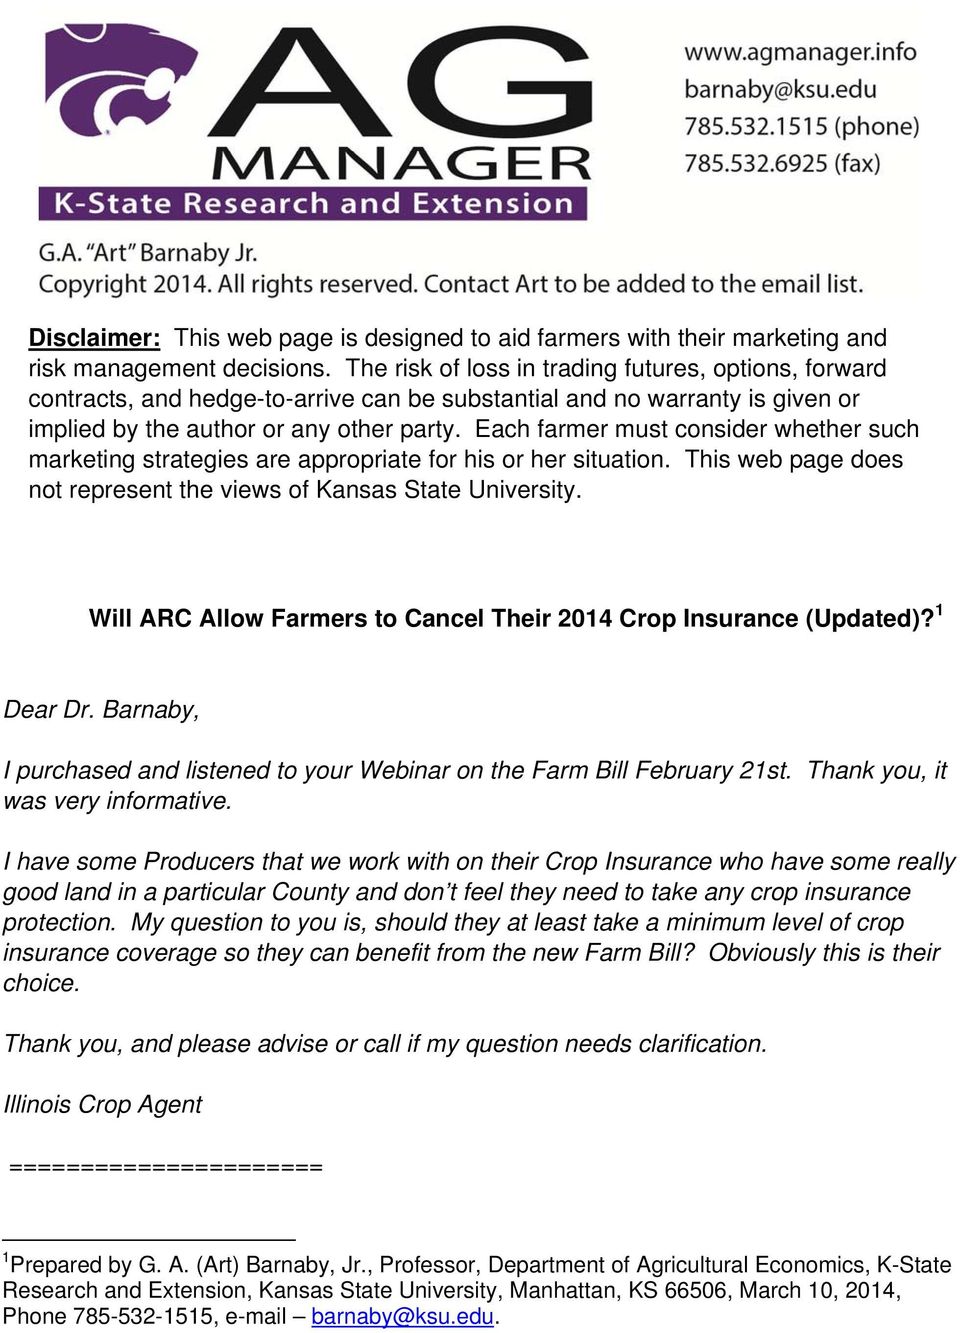 Each farmer must consider whether such marketing strategies are appropriate for his or her situation. This web page does not represent the views of Kansas State University.